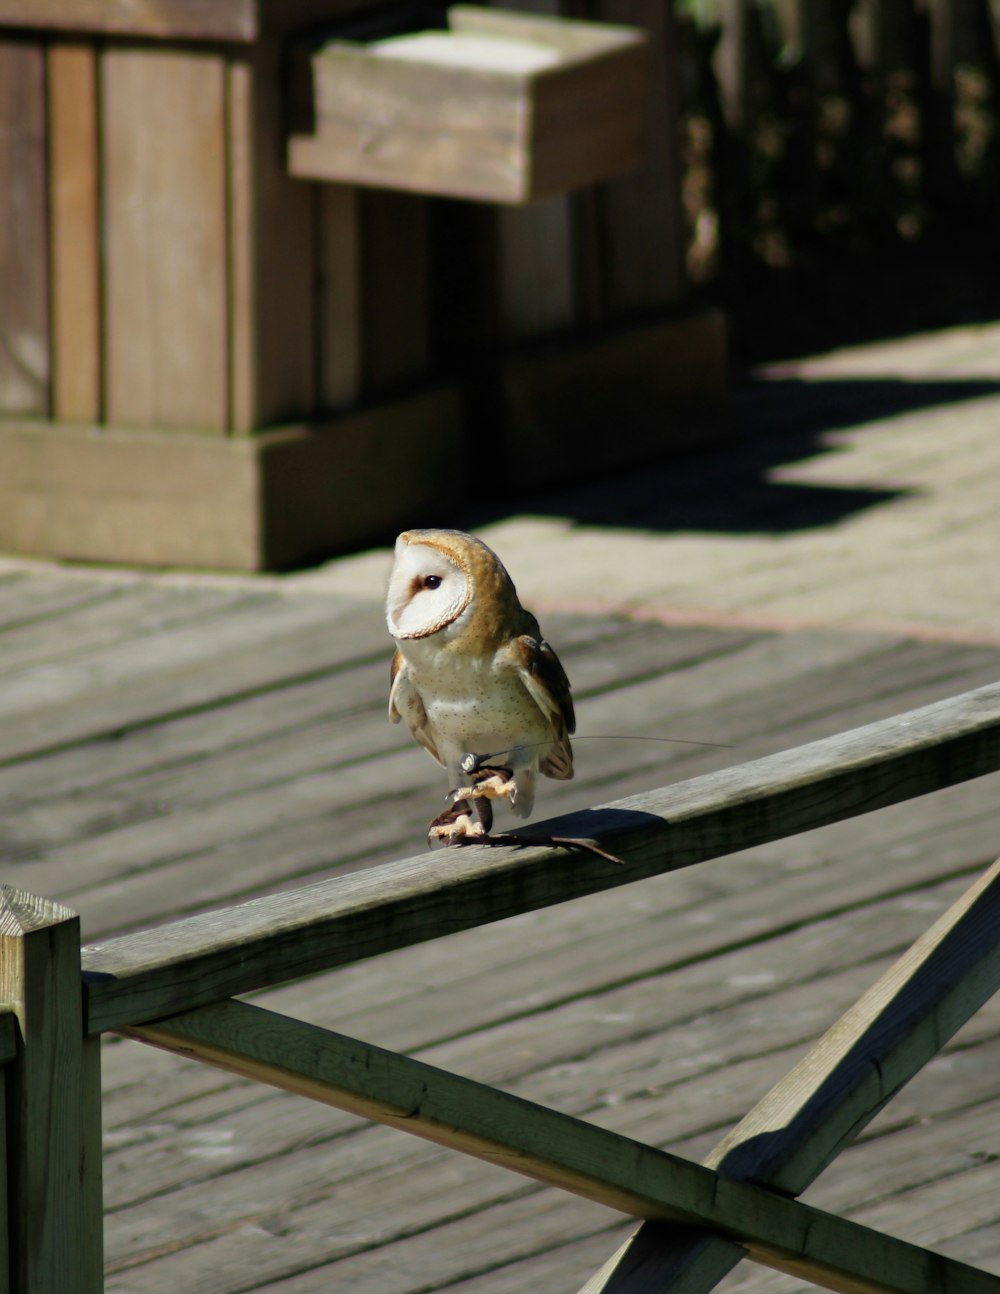 white and brown barn owl